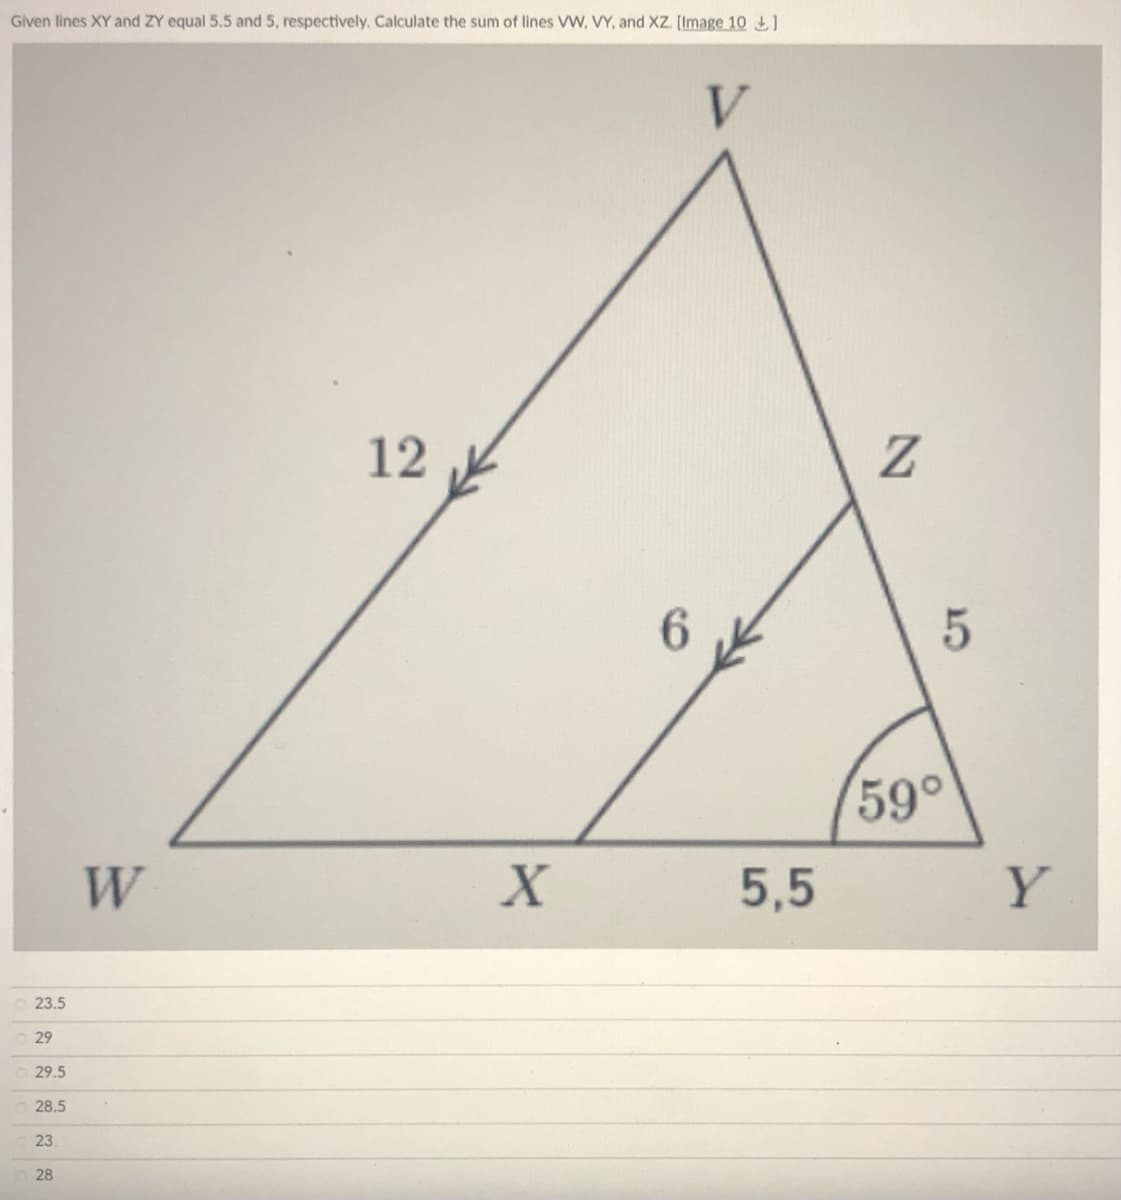 Given lines XY and ZY equal 5.5 and 5, respectively. Calculate the sum of lines VW, VY, and XZ. [Image 10
V
12
6.
59°
W
5,5
Y
23.5
29
29.5
28.5
23
28
